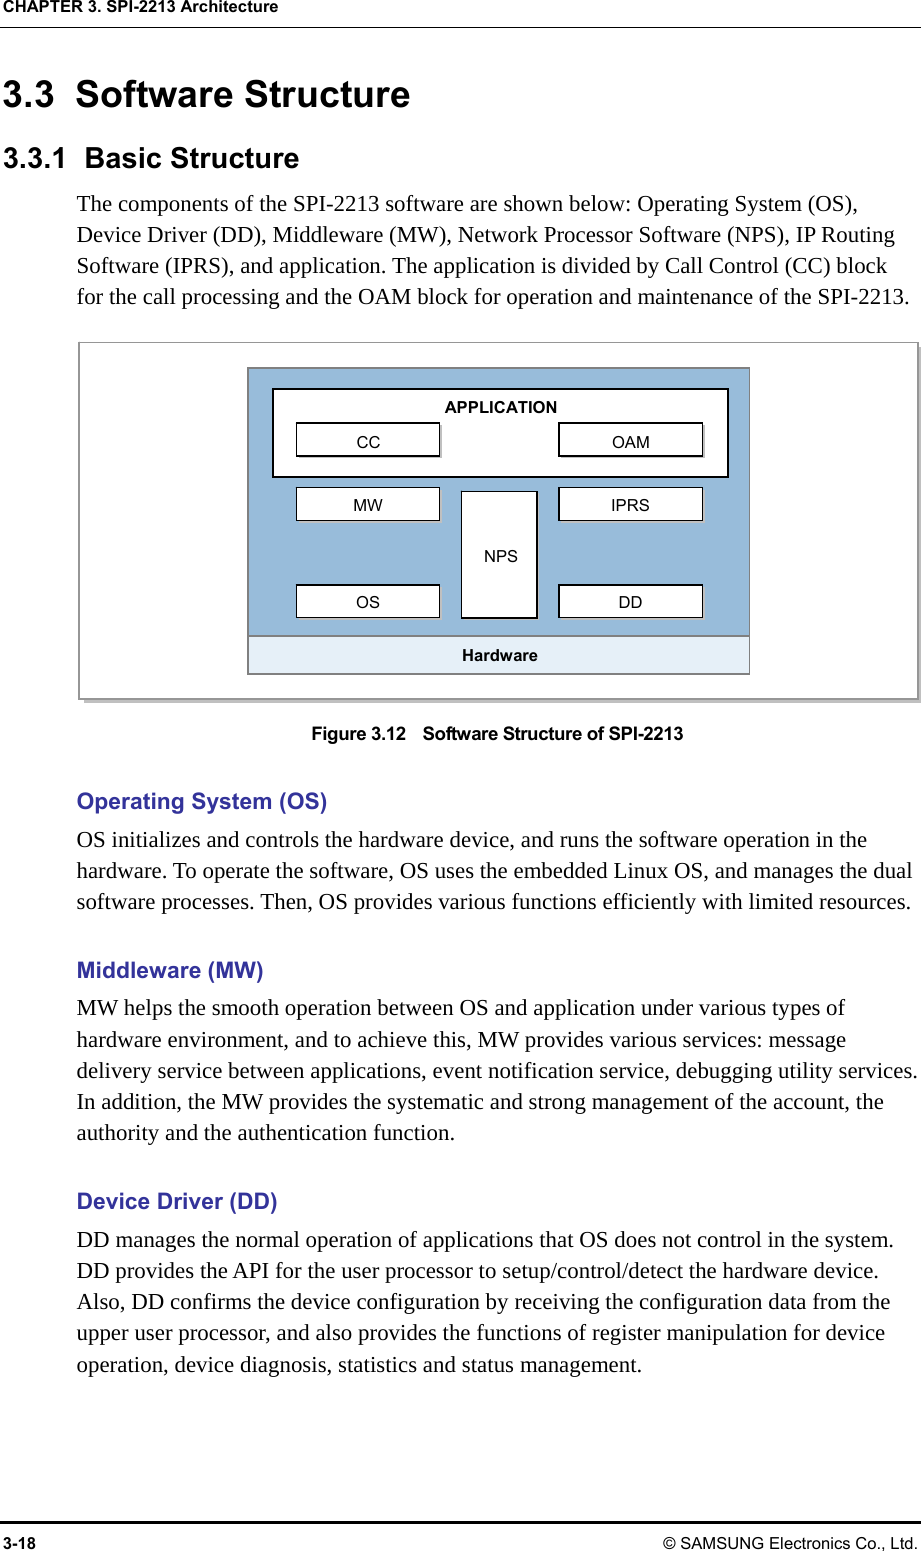 CHAPTER 3. SPI-2213 Architecture 3-18 © SAMSUNG Electronics Co., Ltd. 3.3 Software Structure 3.3.1 Basic Structure The components of the SPI-2213 software are shown below: Operating System (OS), Device Driver (DD), Middleware (MW), Network Processor Software (NPS), IP Routing Software (IPRS), and application. The application is divided by Call Control (CC) block for the call processing and the OAM block for operation and maintenance of the SPI-2213.  Figure 3.12    Software Structure of SPI-2213  Operating System (OS) OS initializes and controls the hardware device, and runs the software operation in the hardware. To operate the software, OS uses the embedded Linux OS, and manages the dual software processes. Then, OS provides various functions efficiently with limited resources.  Middleware (MW) MW helps the smooth operation between OS and application under various types of hardware environment, and to achieve this, MW provides various services: message delivery service between applications, event notification service, debugging utility services. In addition, the MW provides the systematic and strong management of the account, the authority and the authentication function.  Device Driver (DD) DD manages the normal operation of applications that OS does not control in the system. DD provides the API for the user processor to setup/control/detect the hardware device. Also, DD confirms the device configuration by receiving the configuration data from the upper user processor, and also provides the functions of register manipulation for device operation, device diagnosis, statistics and status management.  MW IPRSOS DD NPS Hardware OAMCC APPLICATION 